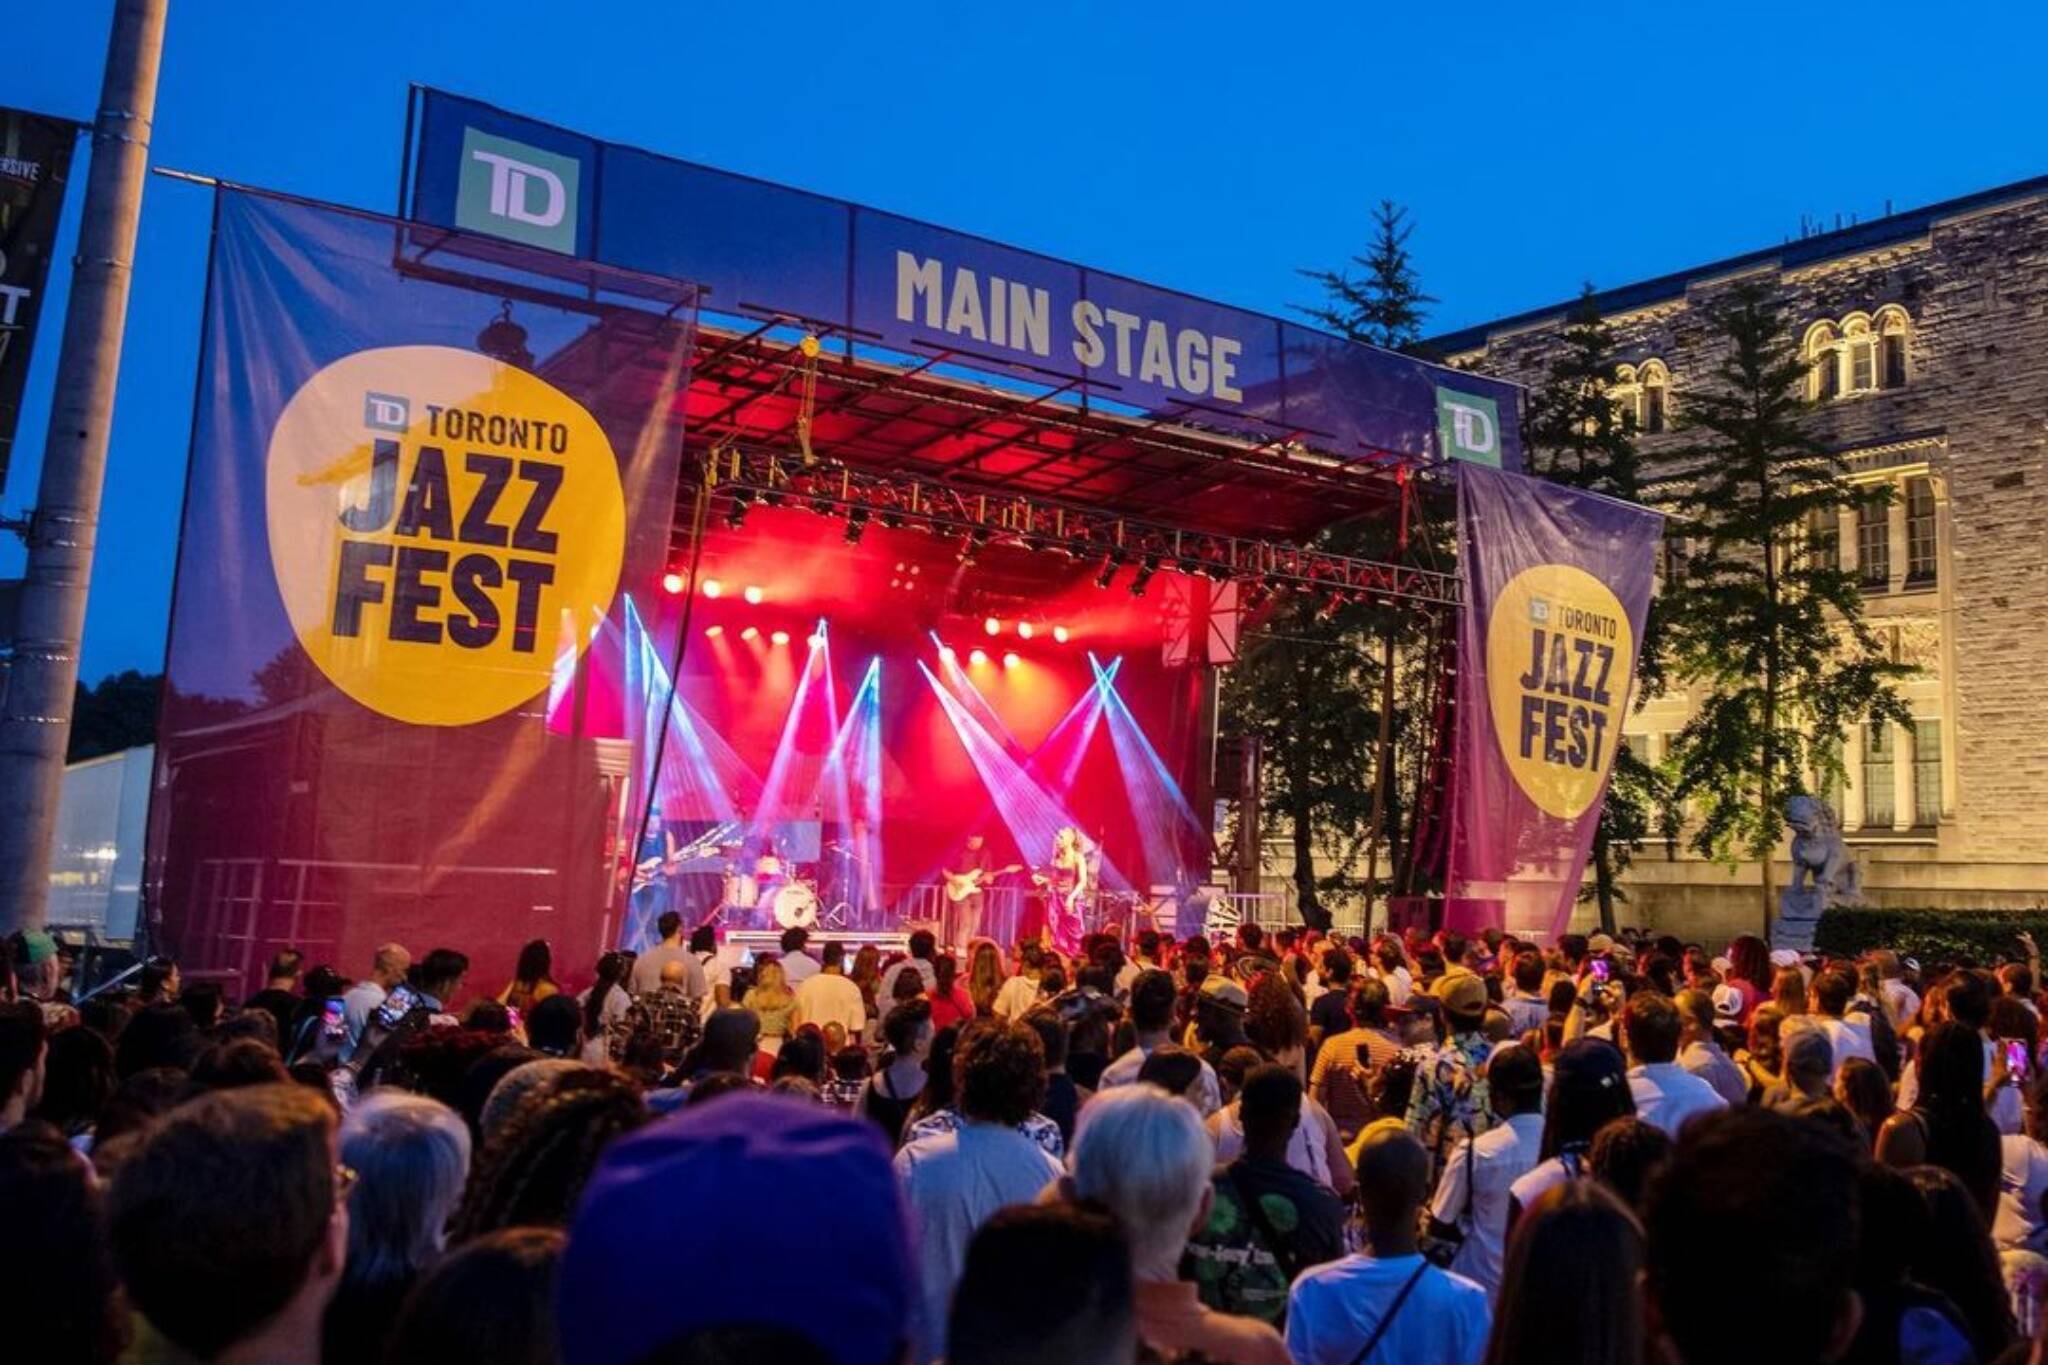 The Toronto Jazz Festival is shutting down streets for more than 100